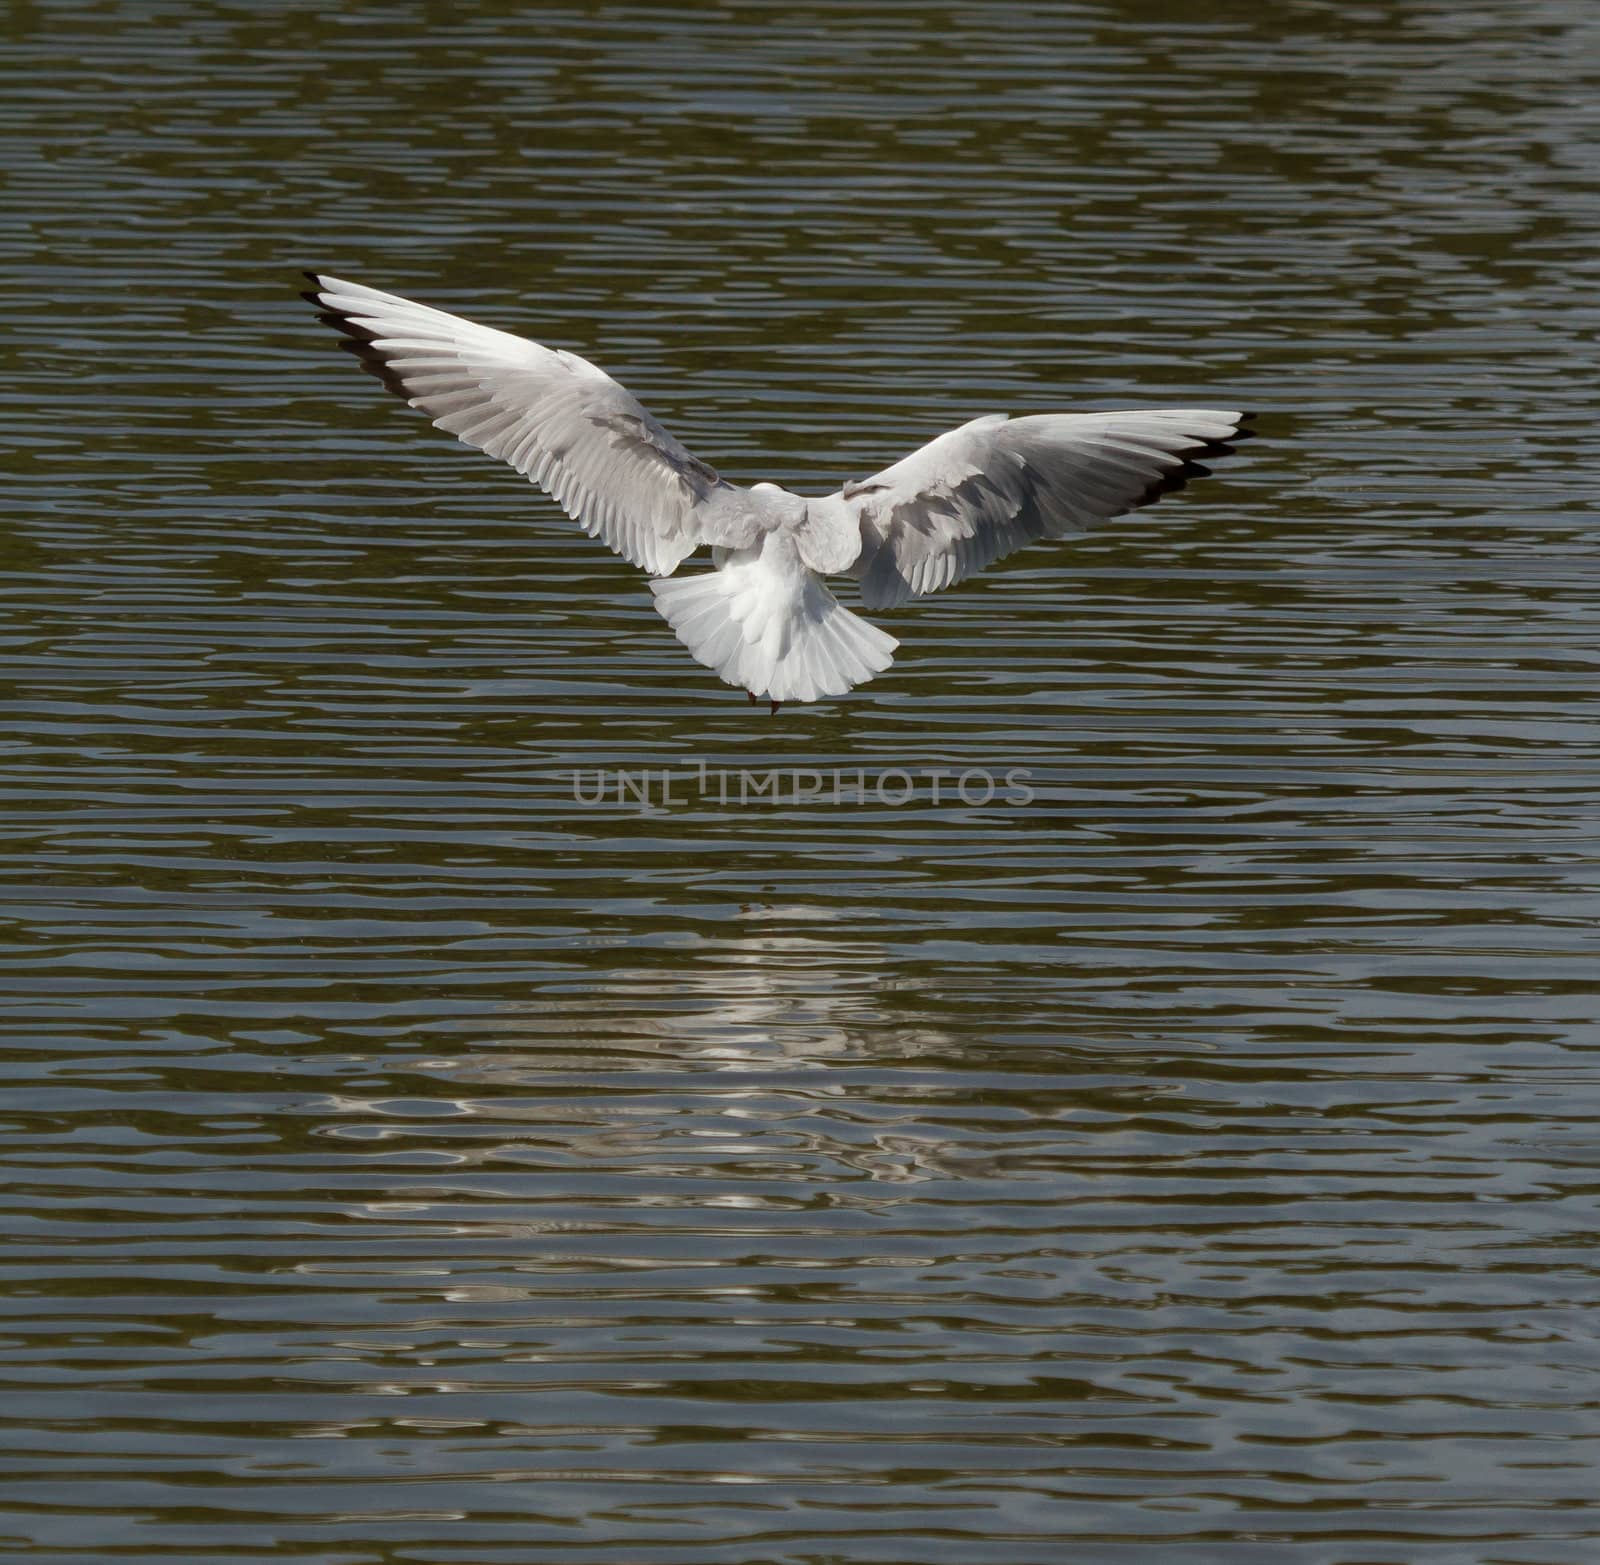 A seagull is flying by michaklootwijk